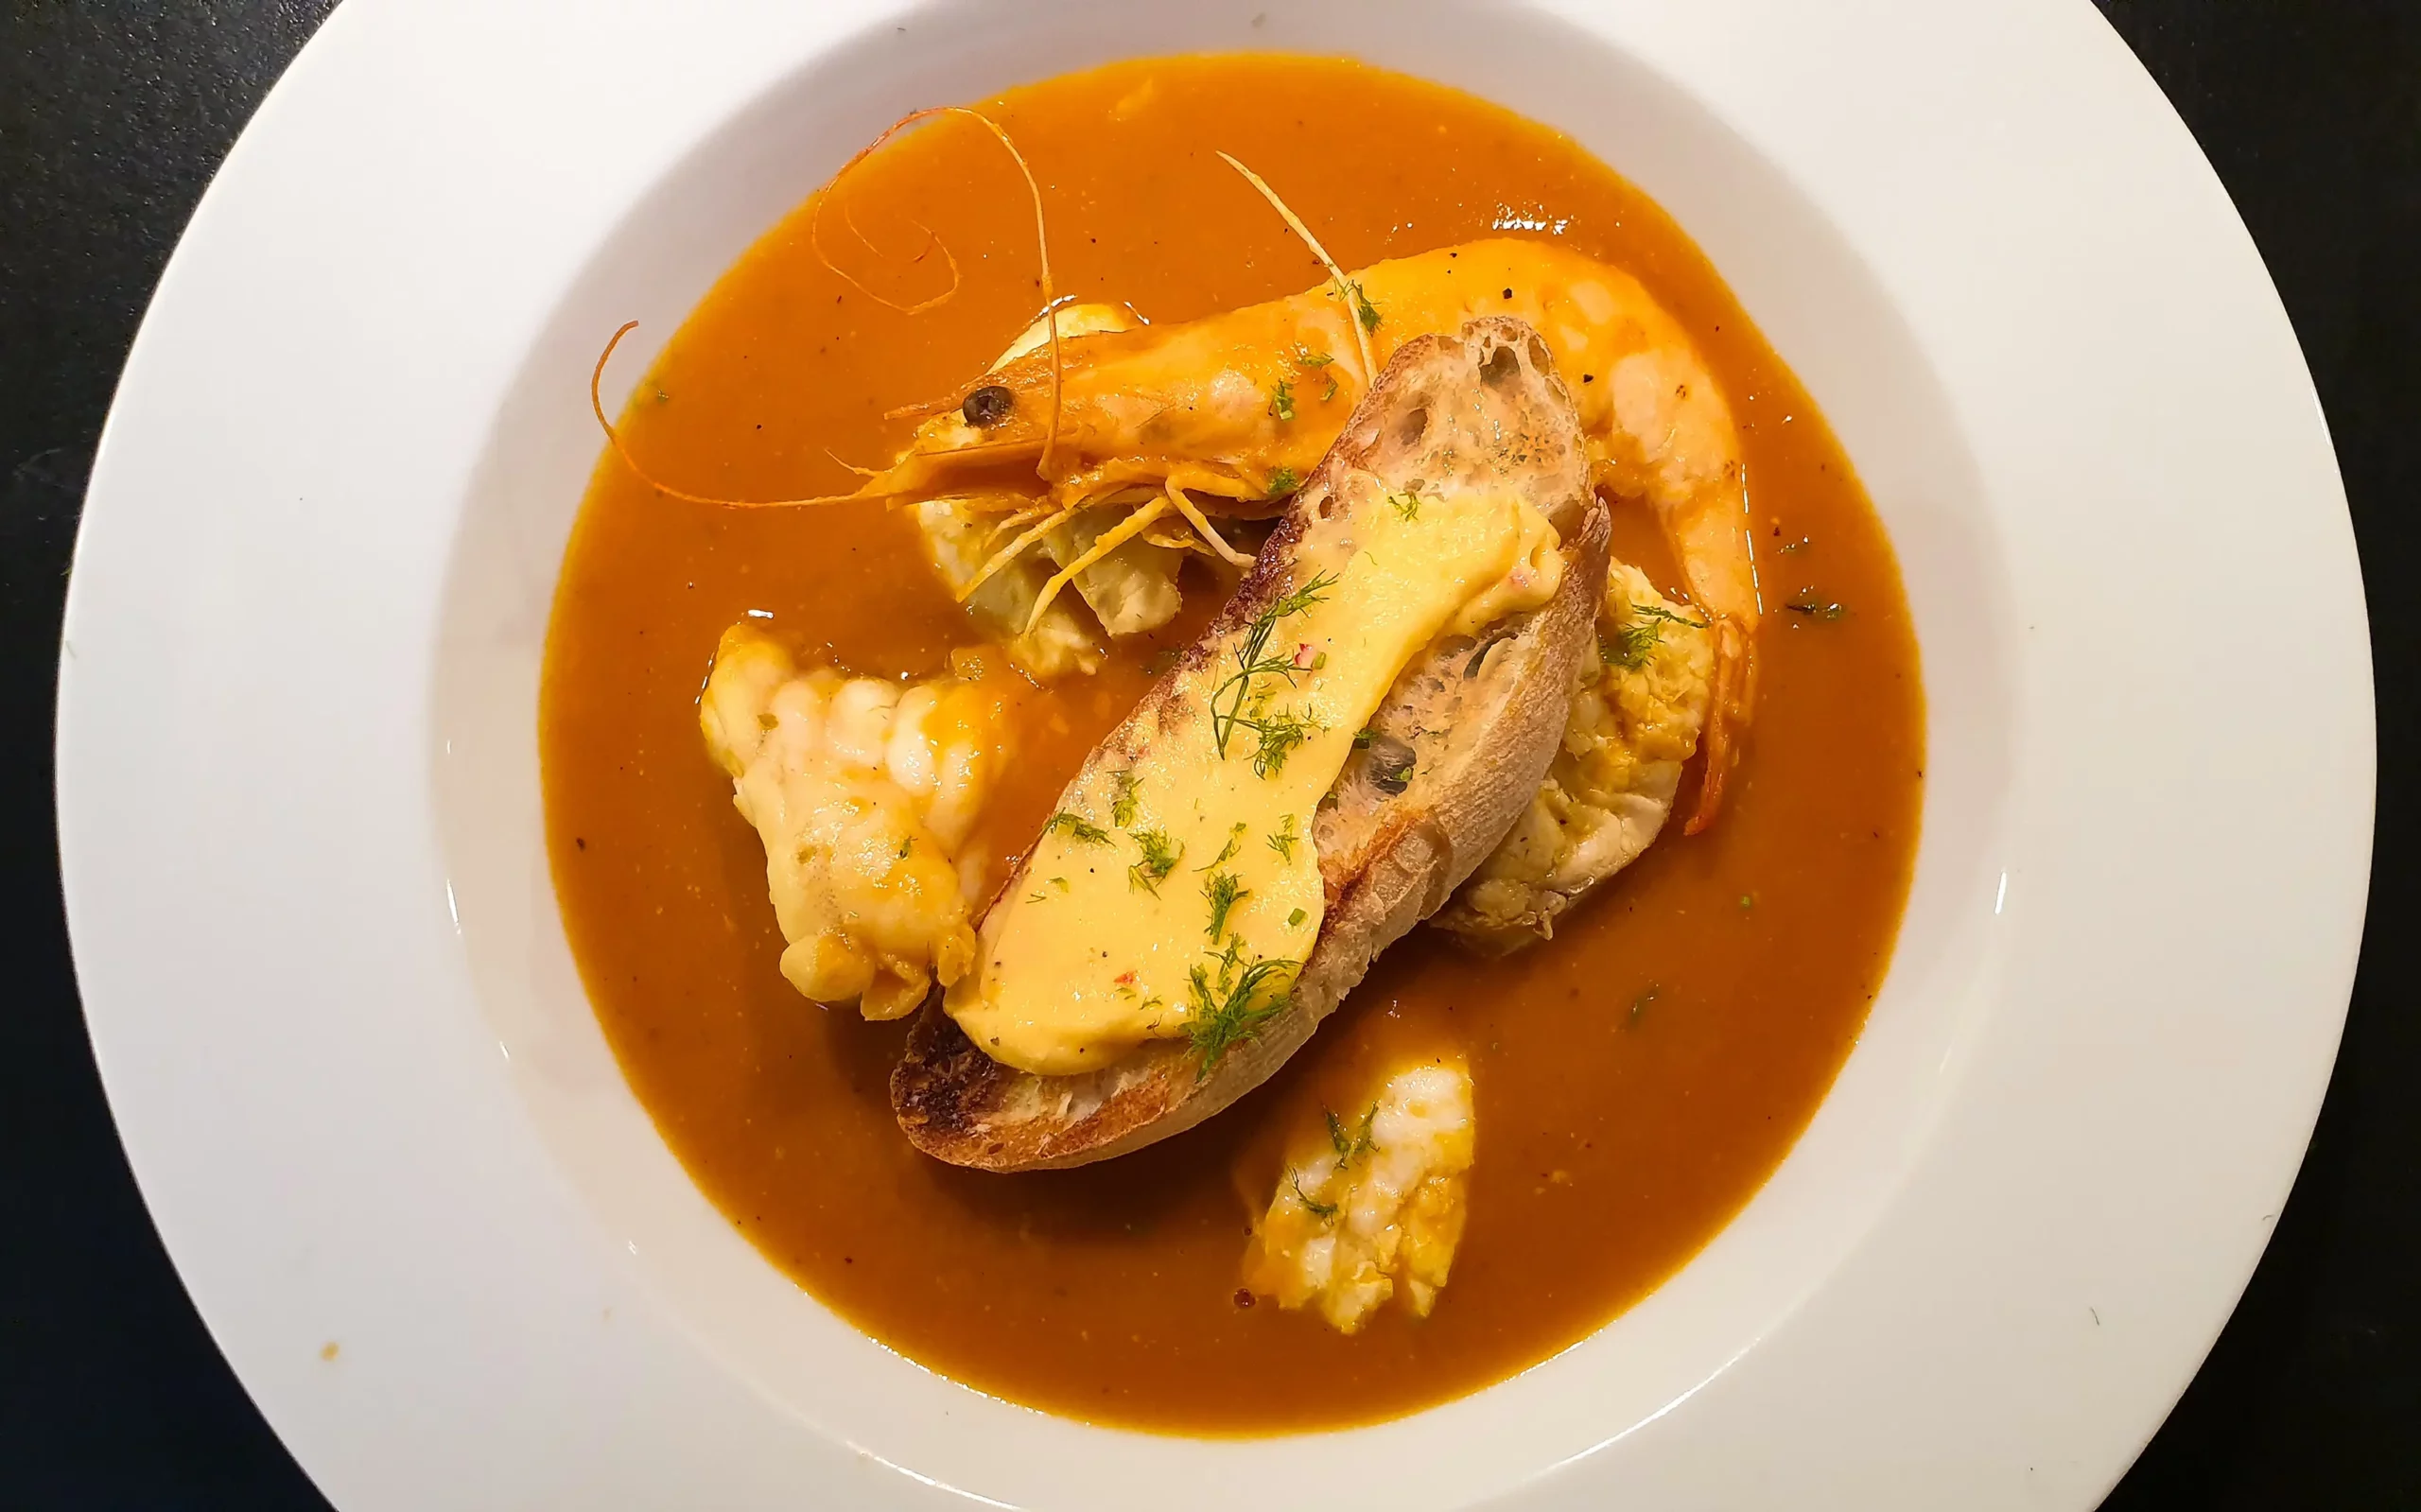 Bouillabaisse is a traditional French fish soup originally a stew made by Marseille fishermen, using the fish which they were unable to sell to restaurants or in the markets. Now a much loved favourite by restaurants and home cooks